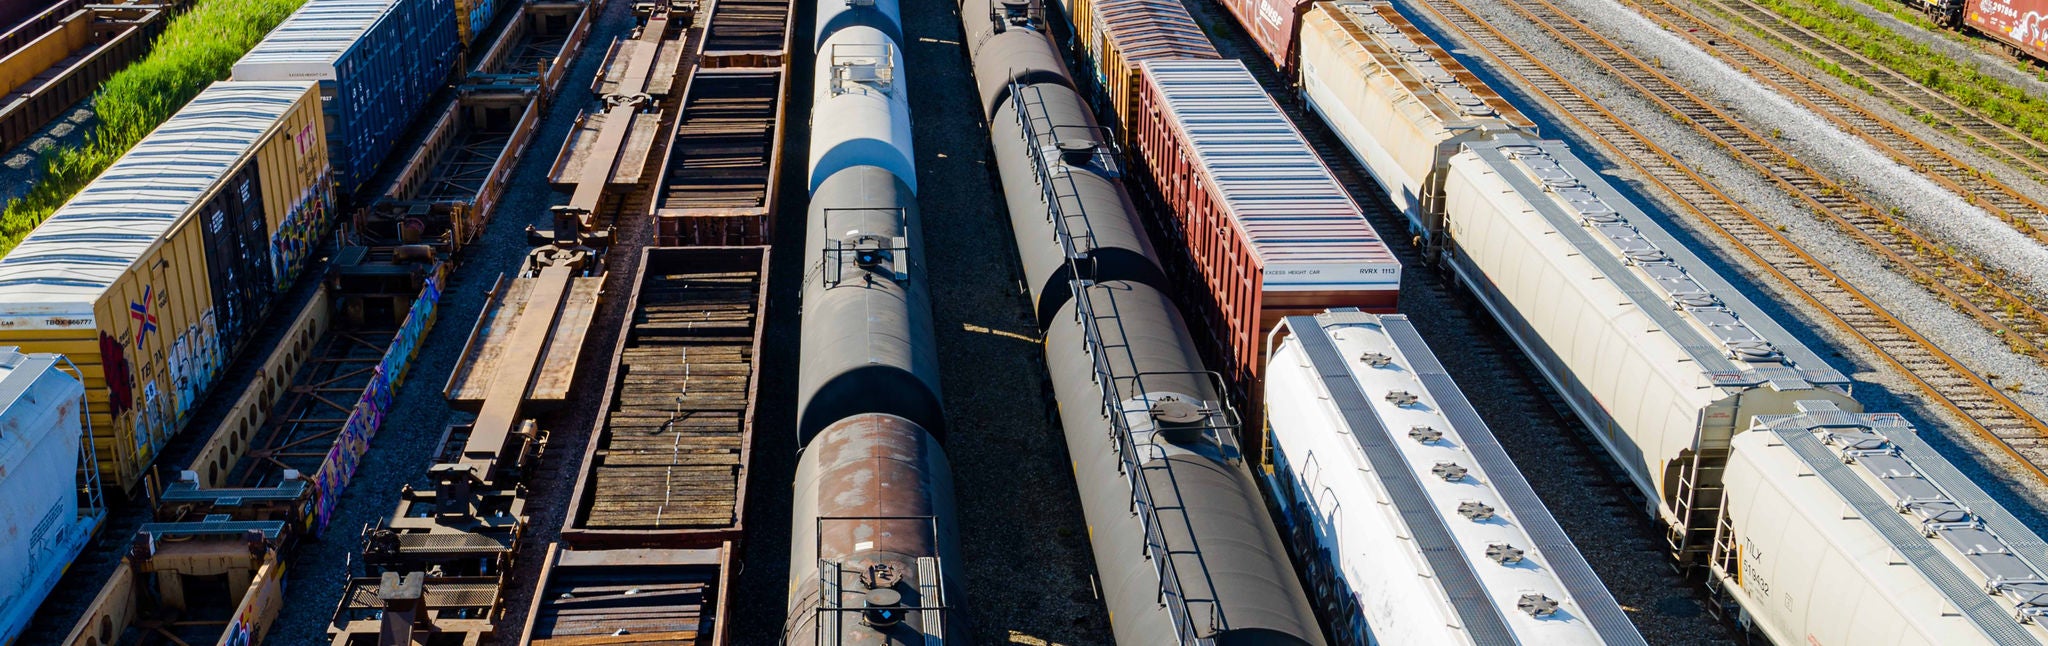 Line of train cars in a train yard ready for chemicals transported by rail